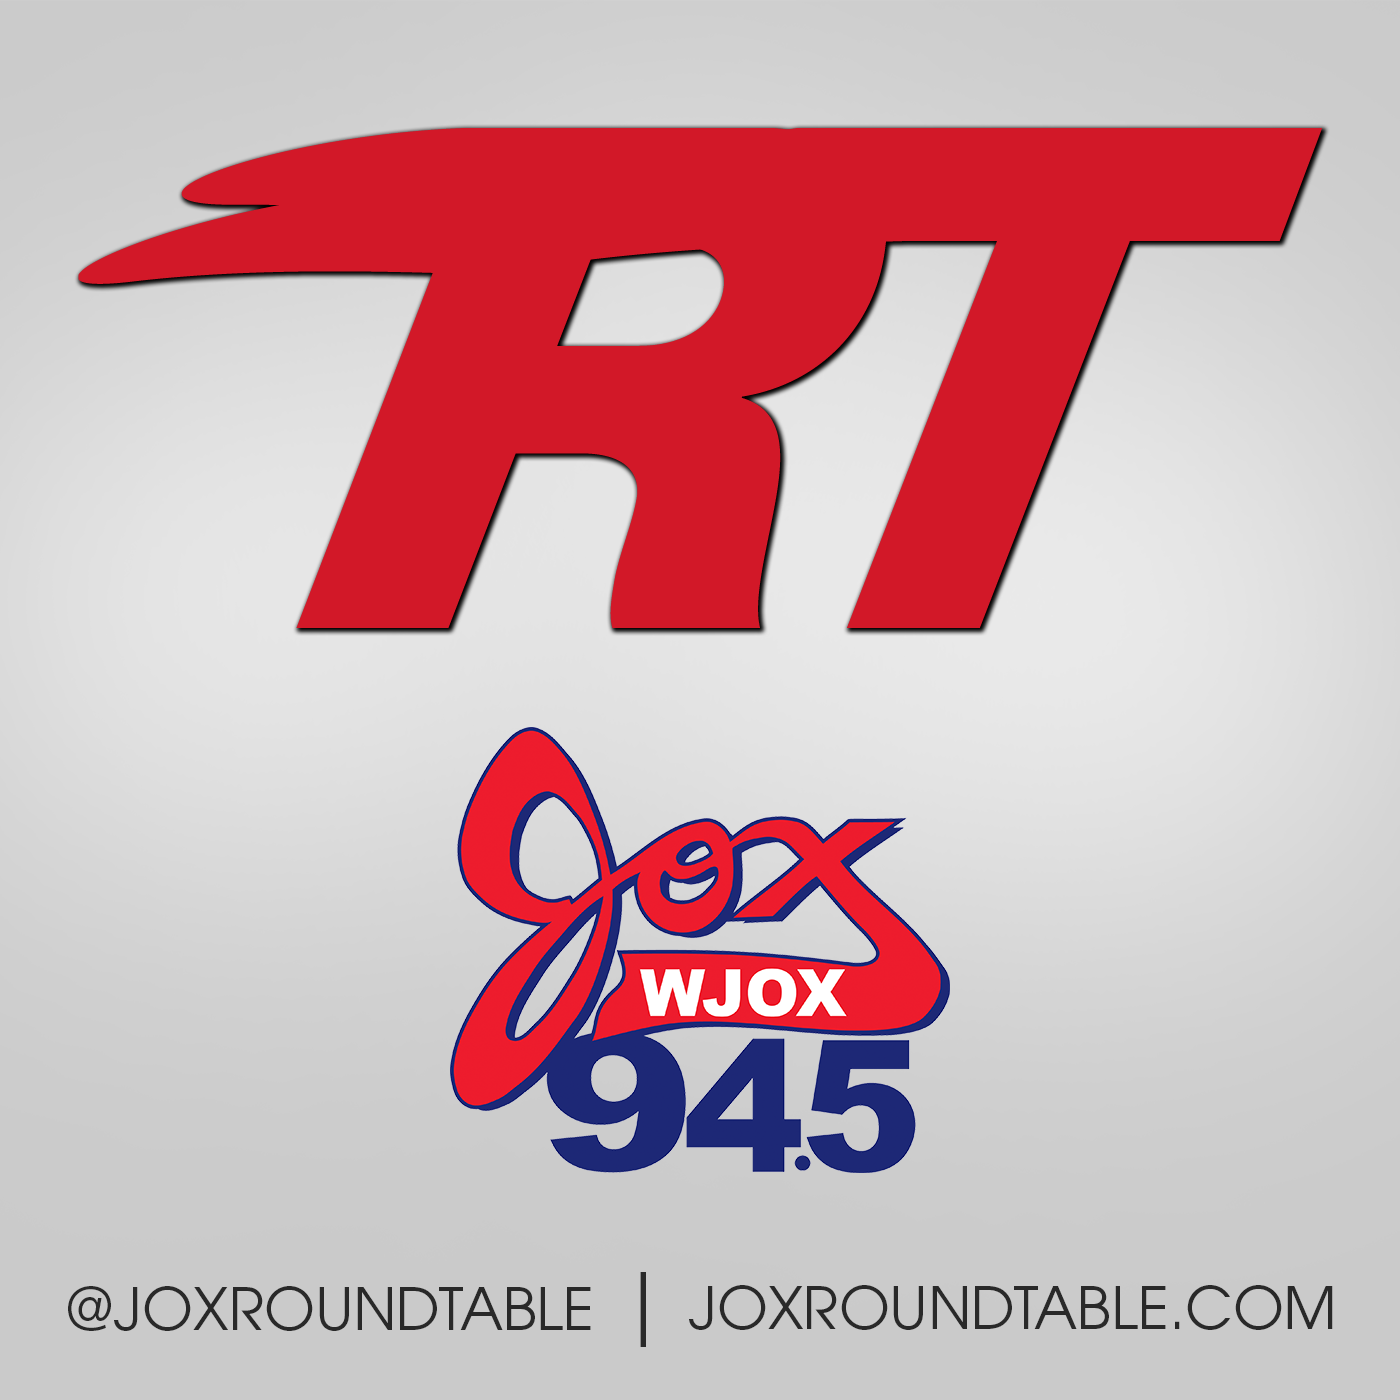 6-11 Rockstar's Roundtable Lounge with Taylor Hunnicut